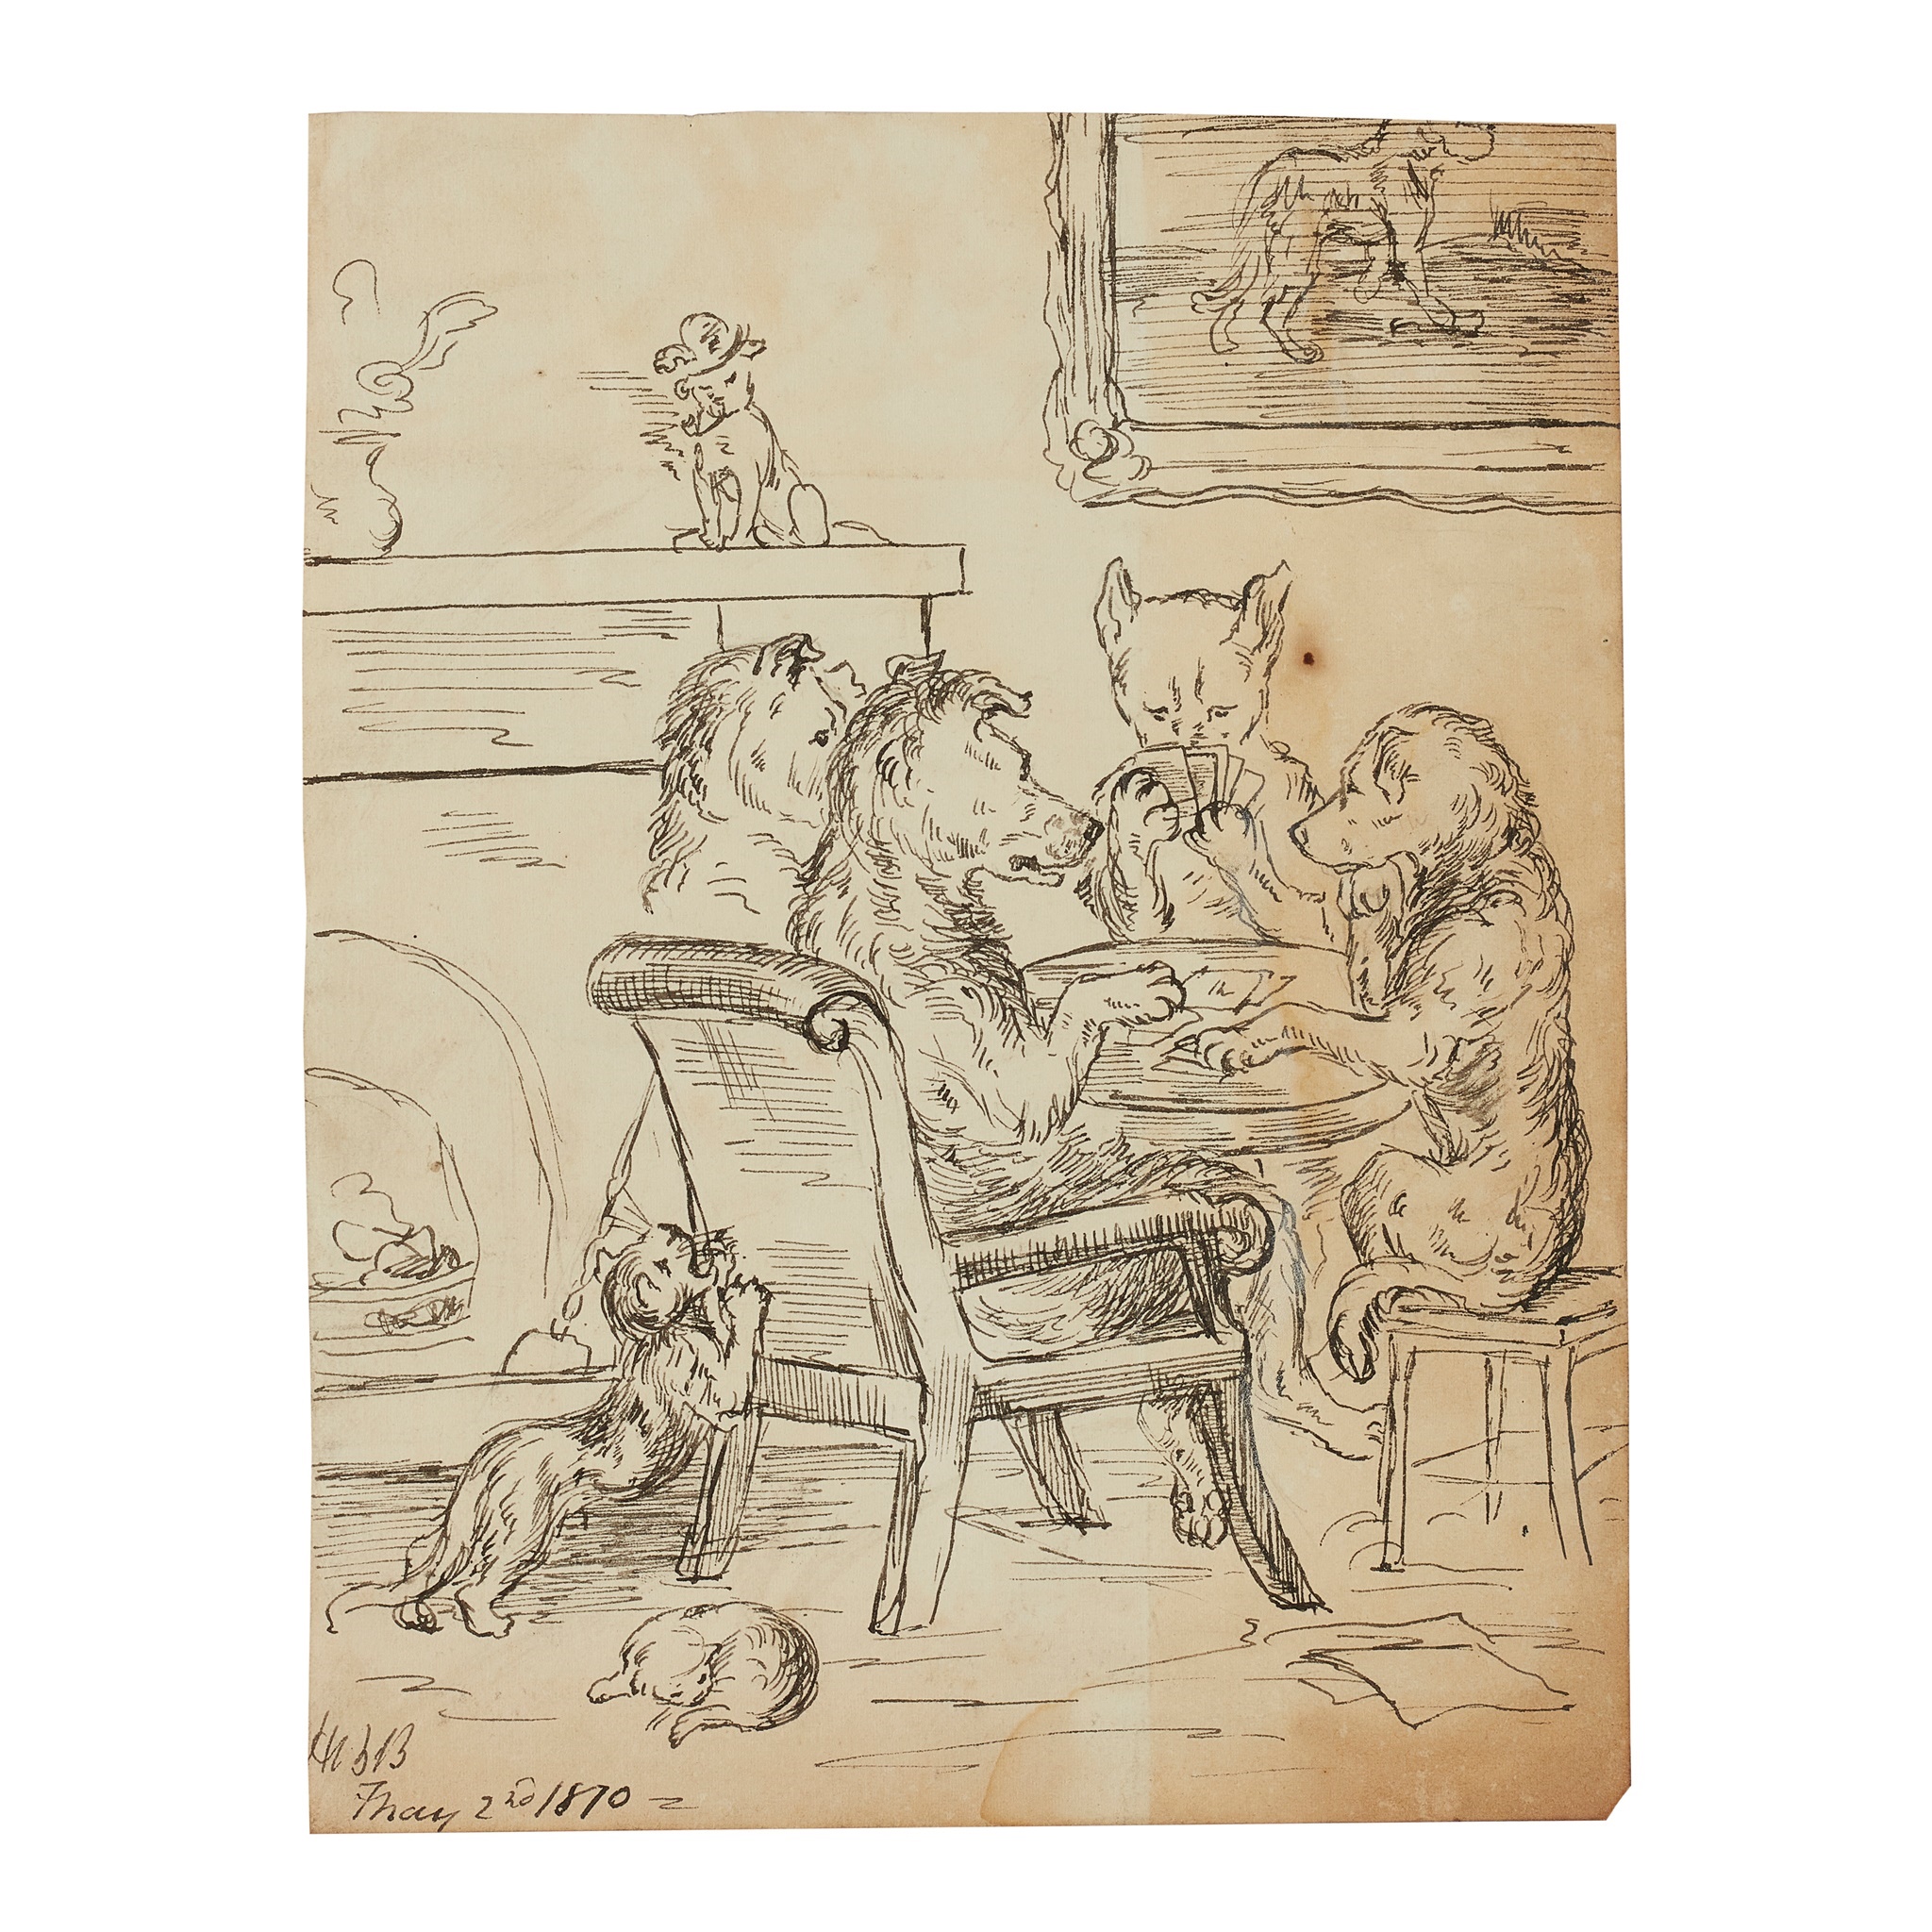 188 HANNAH BARLOW (1851-1916) THE DOG CARD GAME, 1870 pen and ink on paper, bears monogram and dated in pen (lower left), 21cm (8 1/4in) high, 16cm (6 1/4in) wide; together with FOURTEEN FURTHER DRAWINGS, mainly featuring dogs and cats, all unframed  (Qty: 15)  Literature: Christie’s South Kensington, Catalogue of an exhibition of pottery Hannah Barlow: a pioneer Doulton artist 1851- 1916, August 1985, published by Richard Dennis, p. 12, fig. 13 (illustrated).  Estimate £800 - £1,200